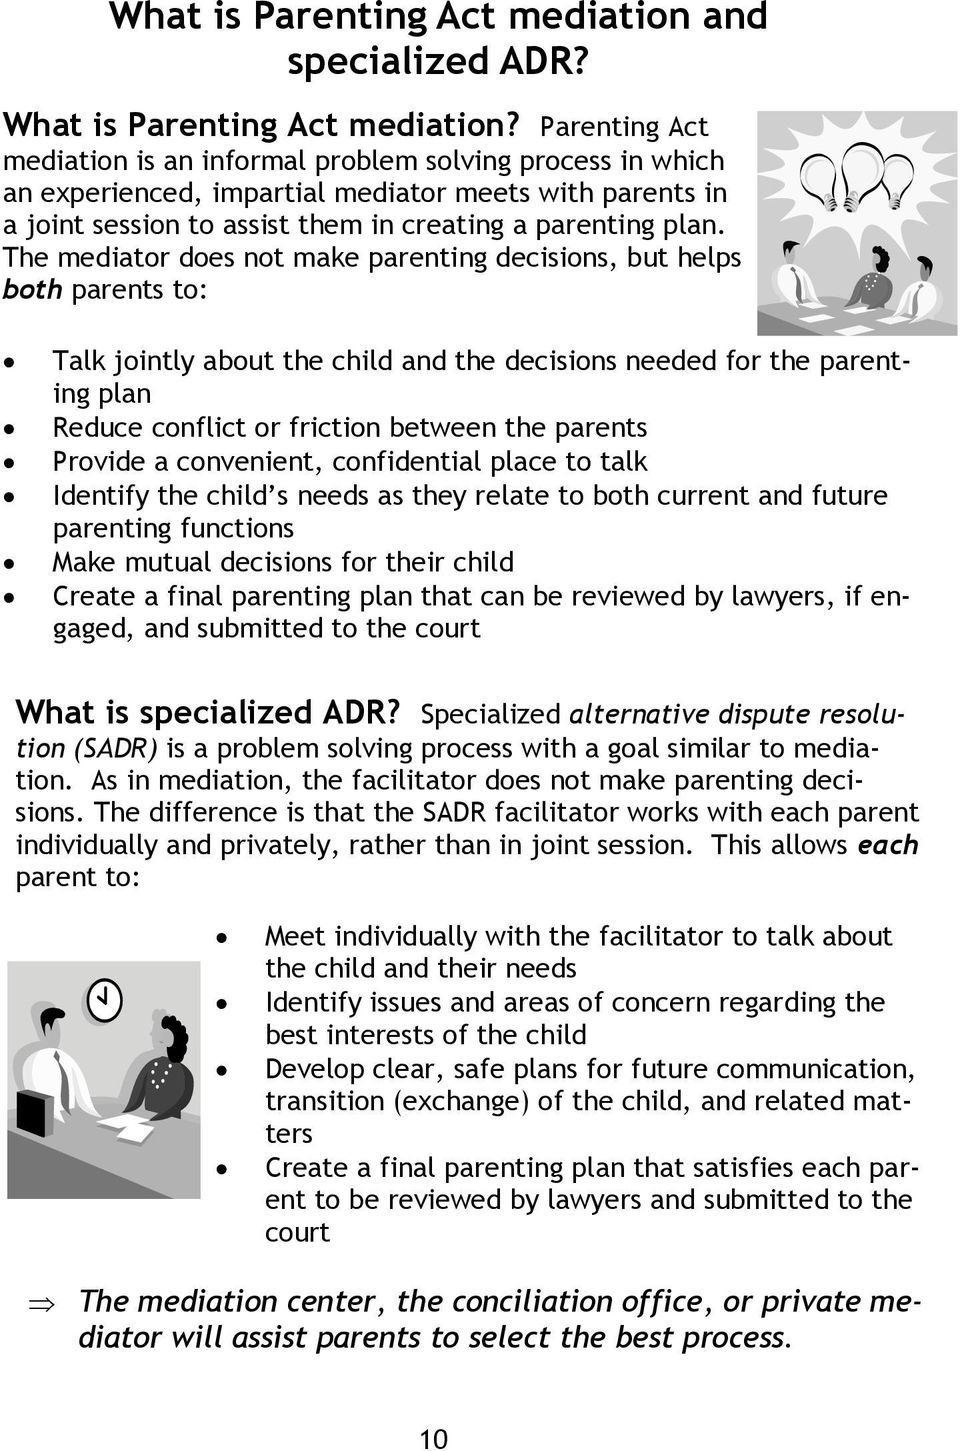 The mediator does not make parenting decisions, but helps both parents to: Talk jointly about the child and the decisions needed for the parenting plan Reduce conflict or friction between the parents